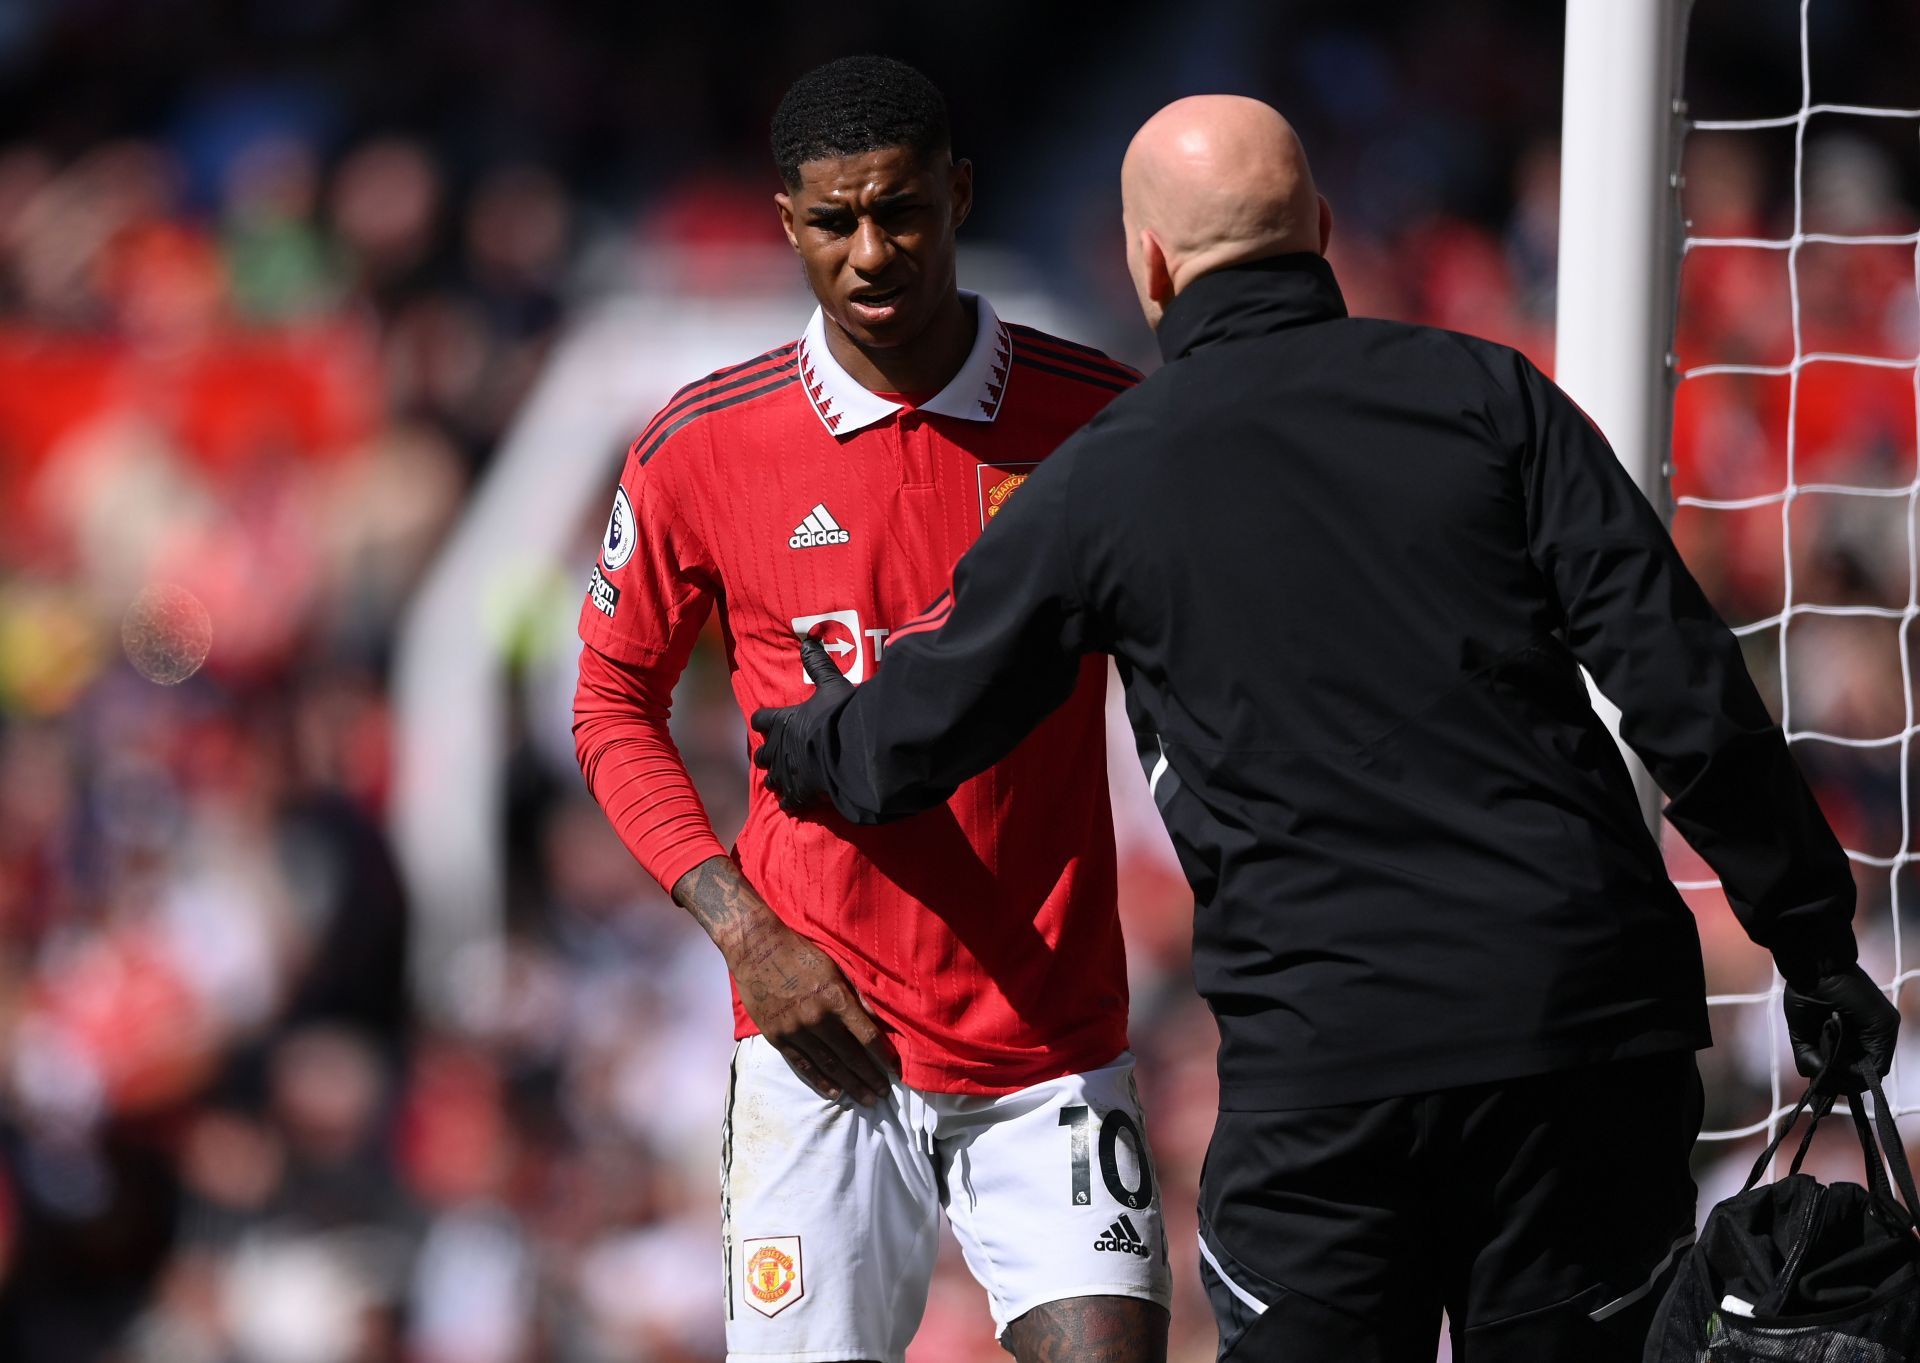 Marcus Rashford could miss the next few games with injury.